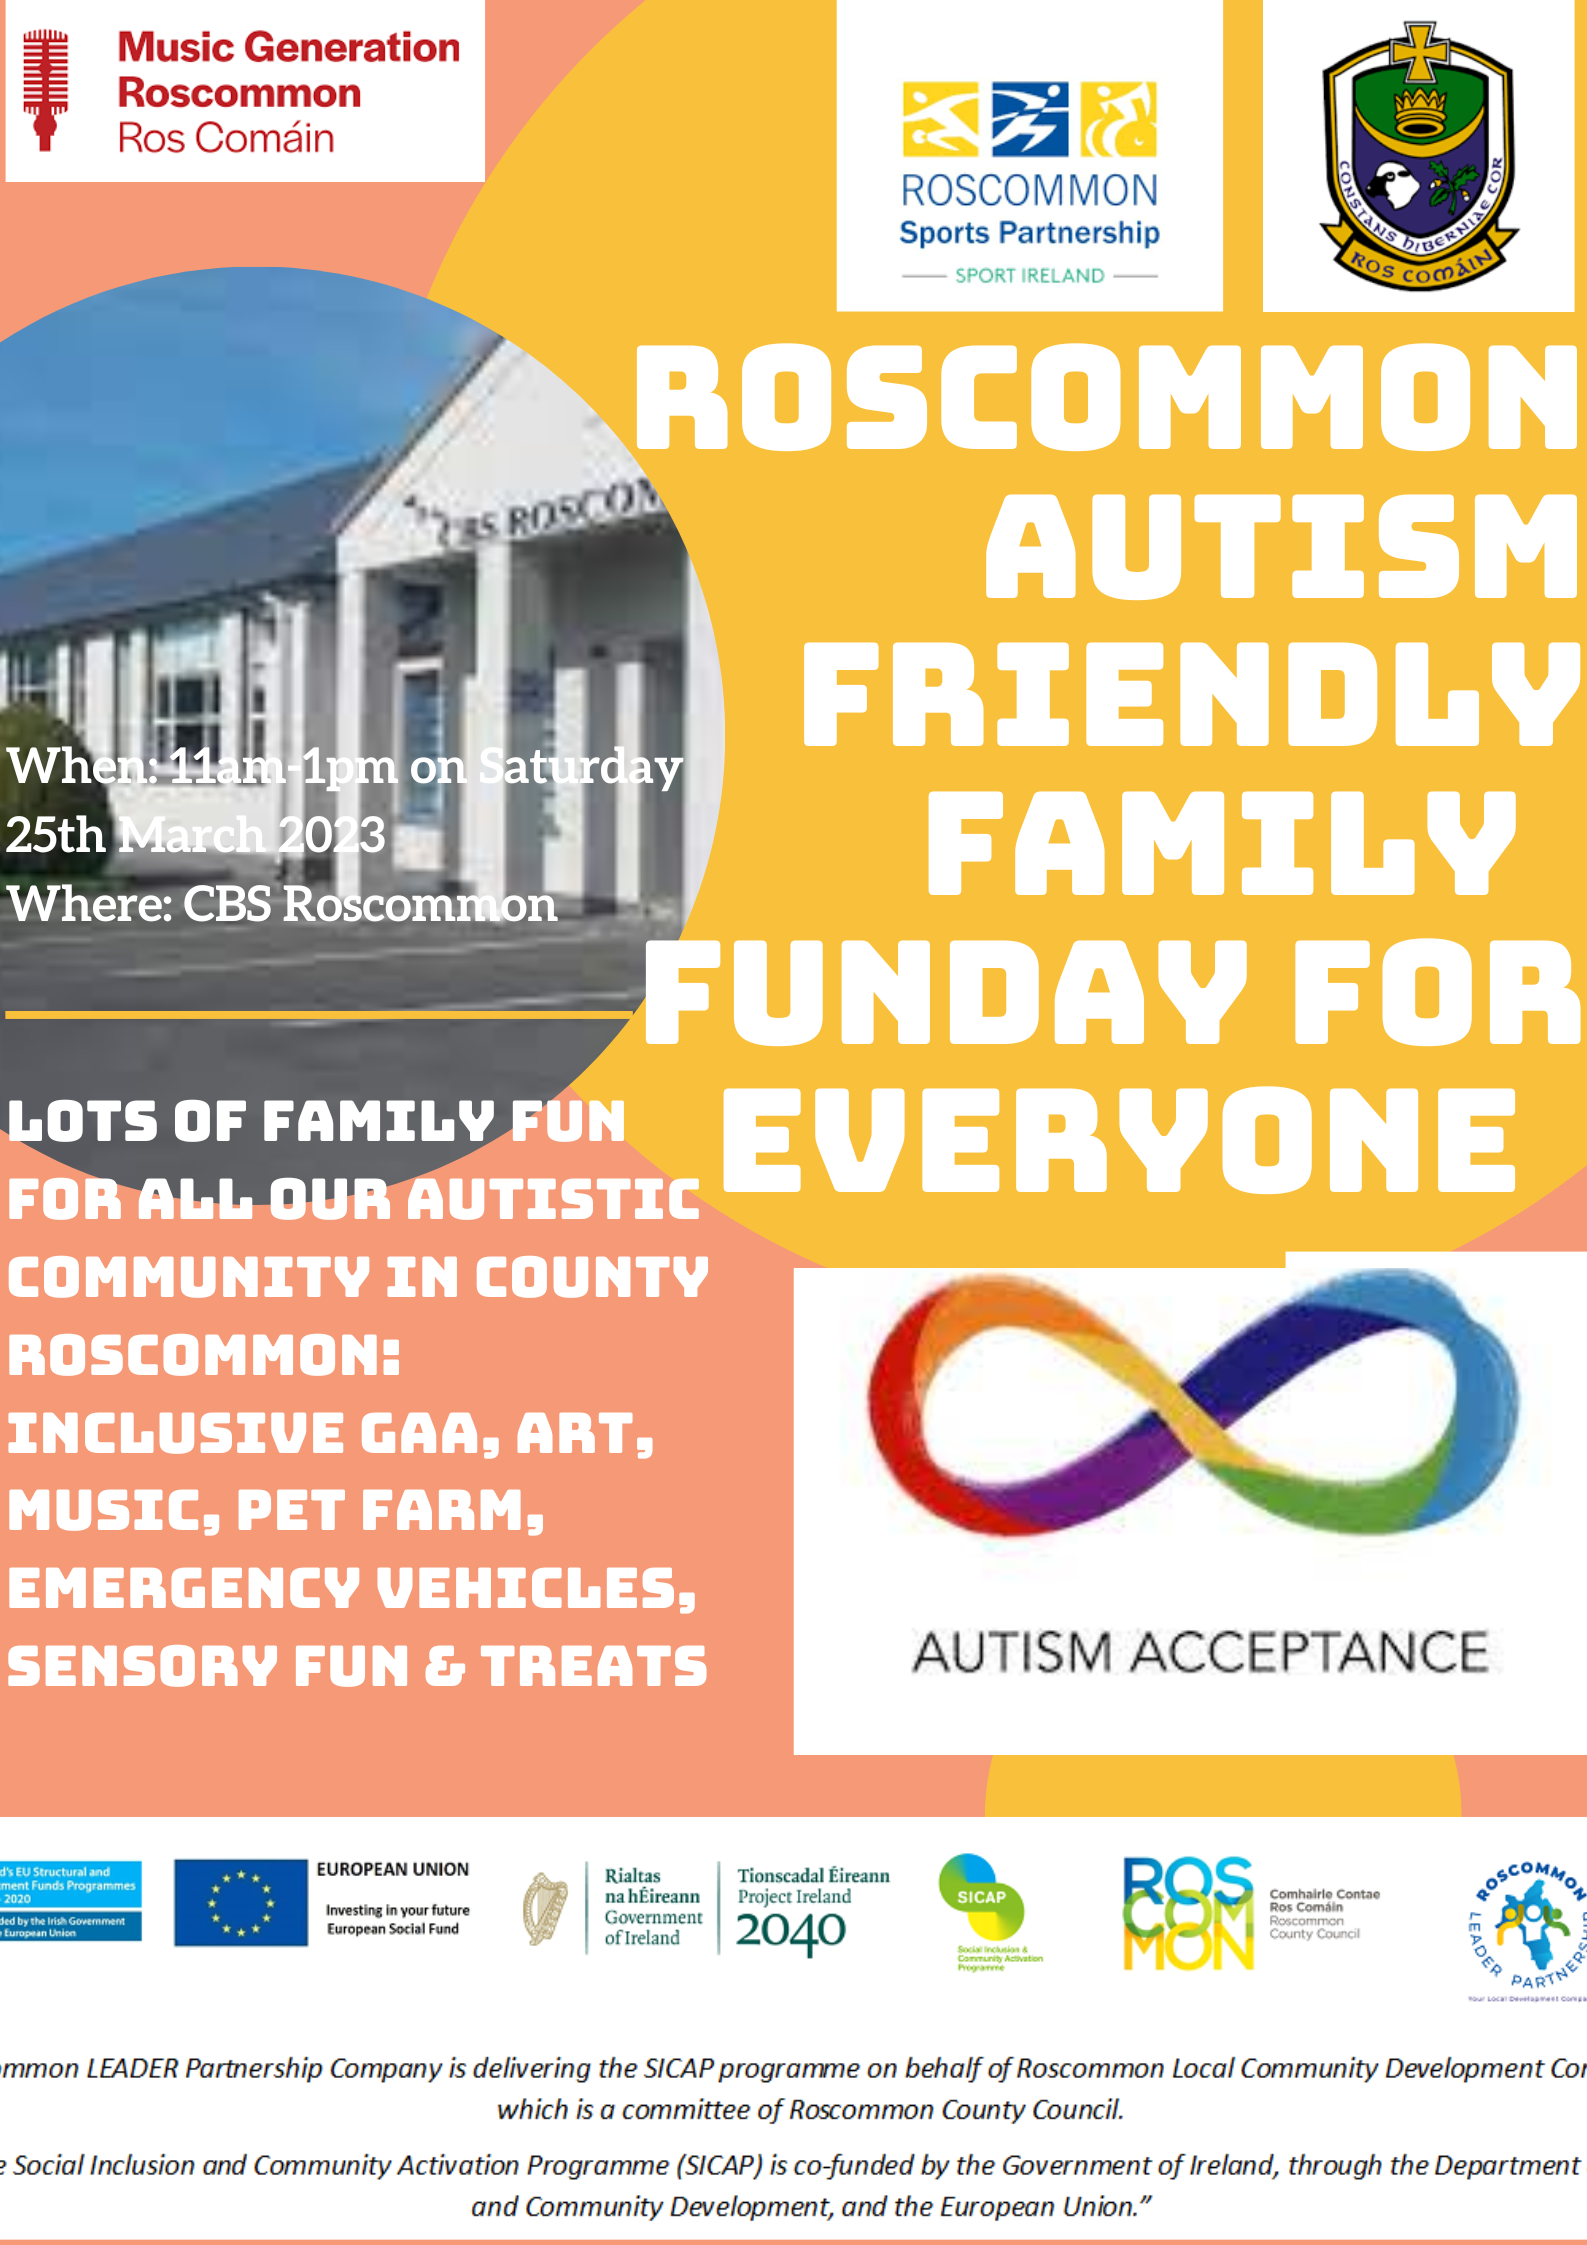 Autism Friendly Family Funday